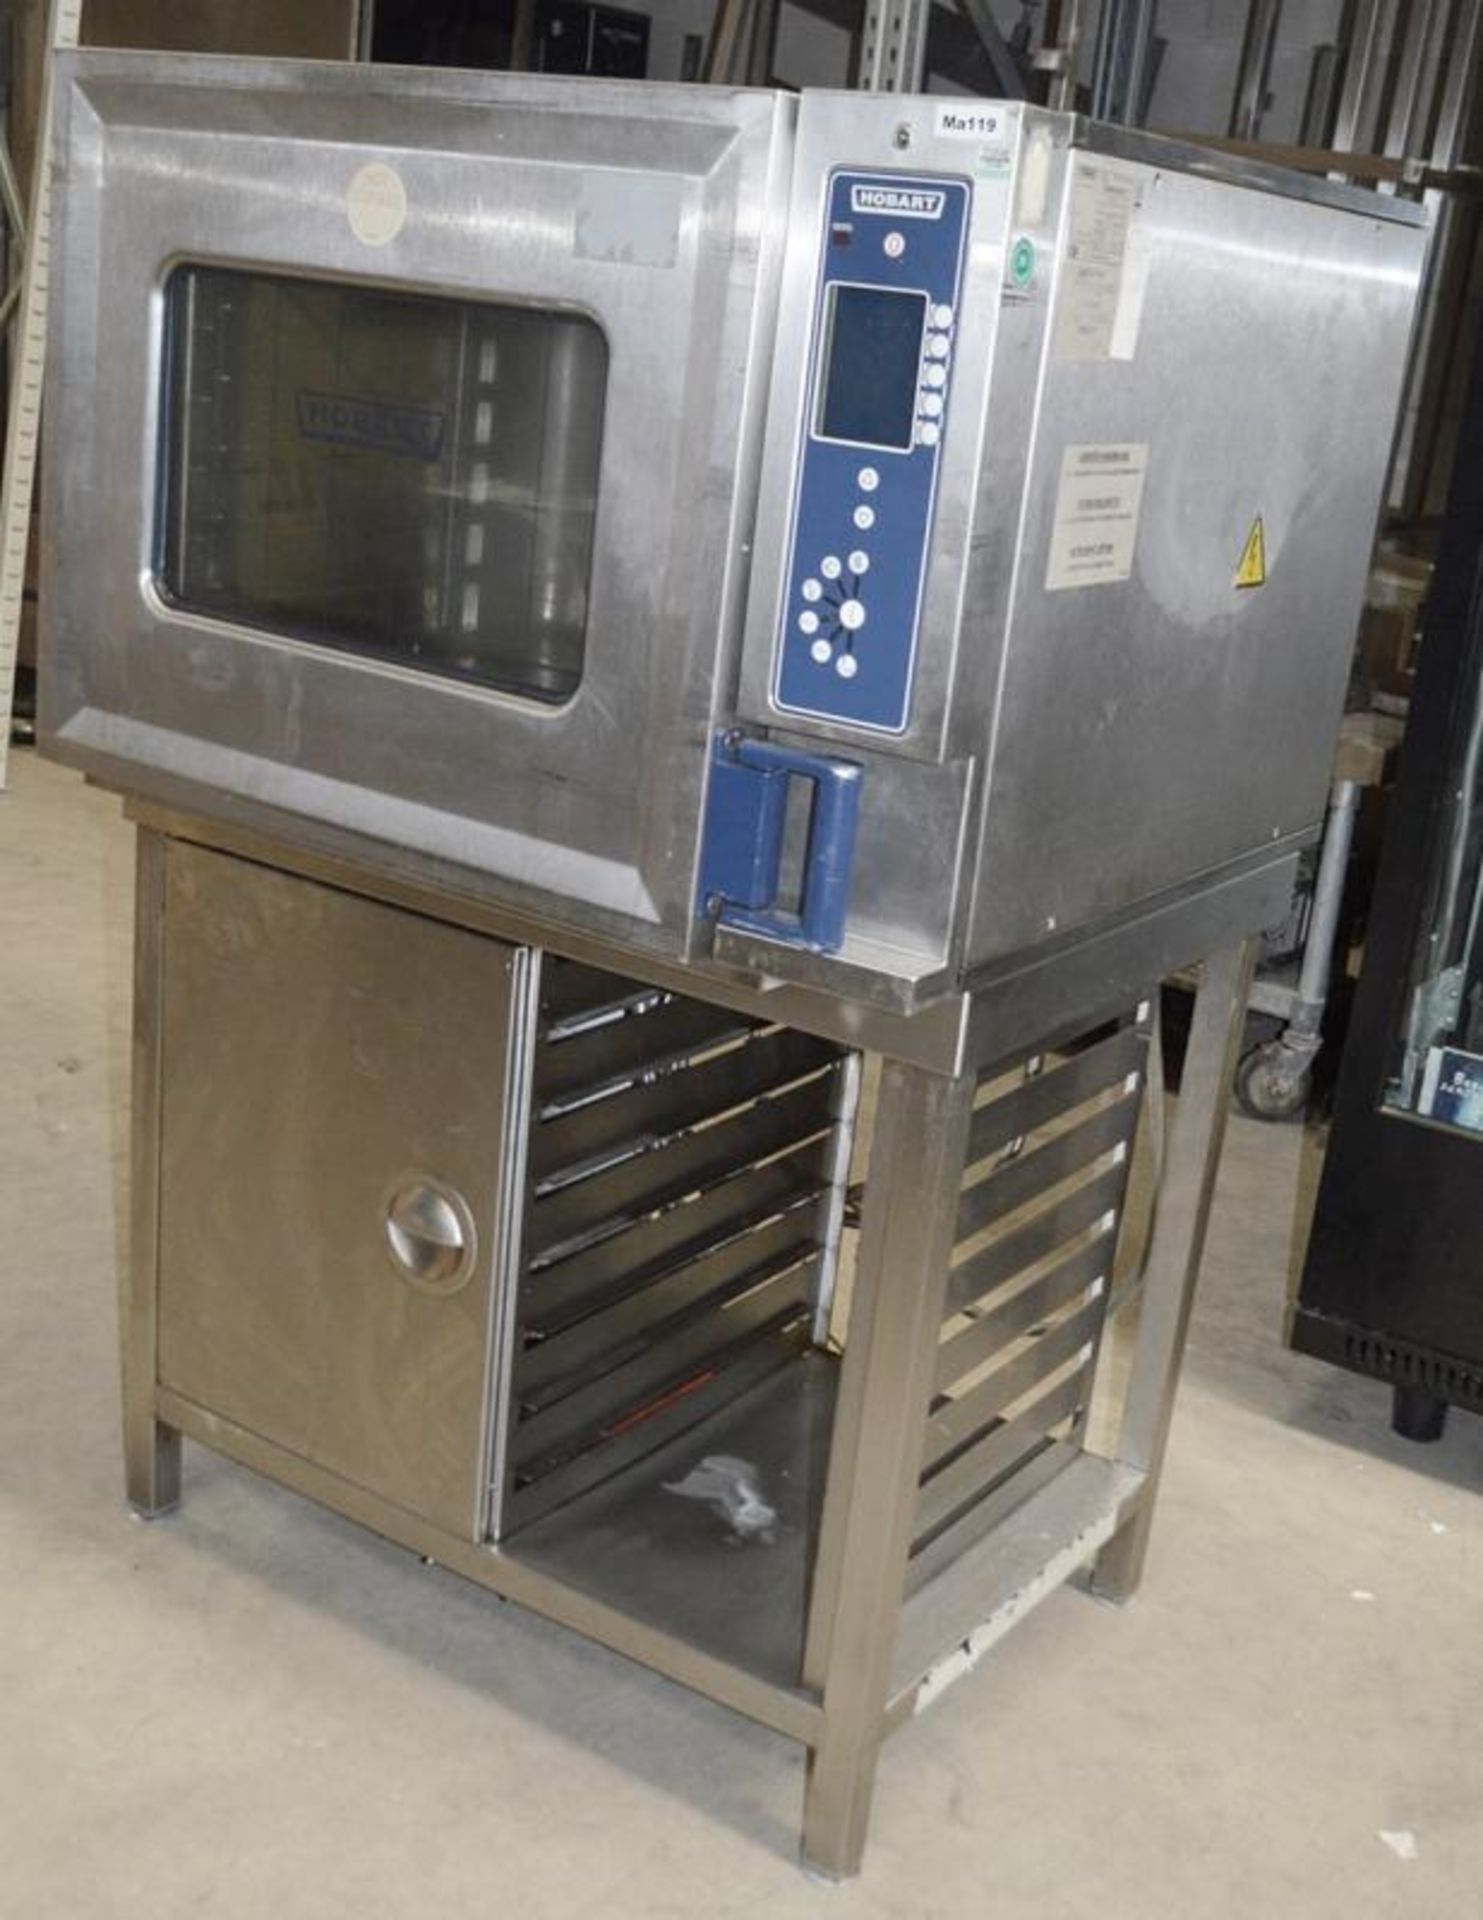 1 x HOBART CSDUC 6-Grid Combi Oven With Stand - 3 phase - Dimensions: H140 x W90 x D90cm - Stainless - Image 9 of 11